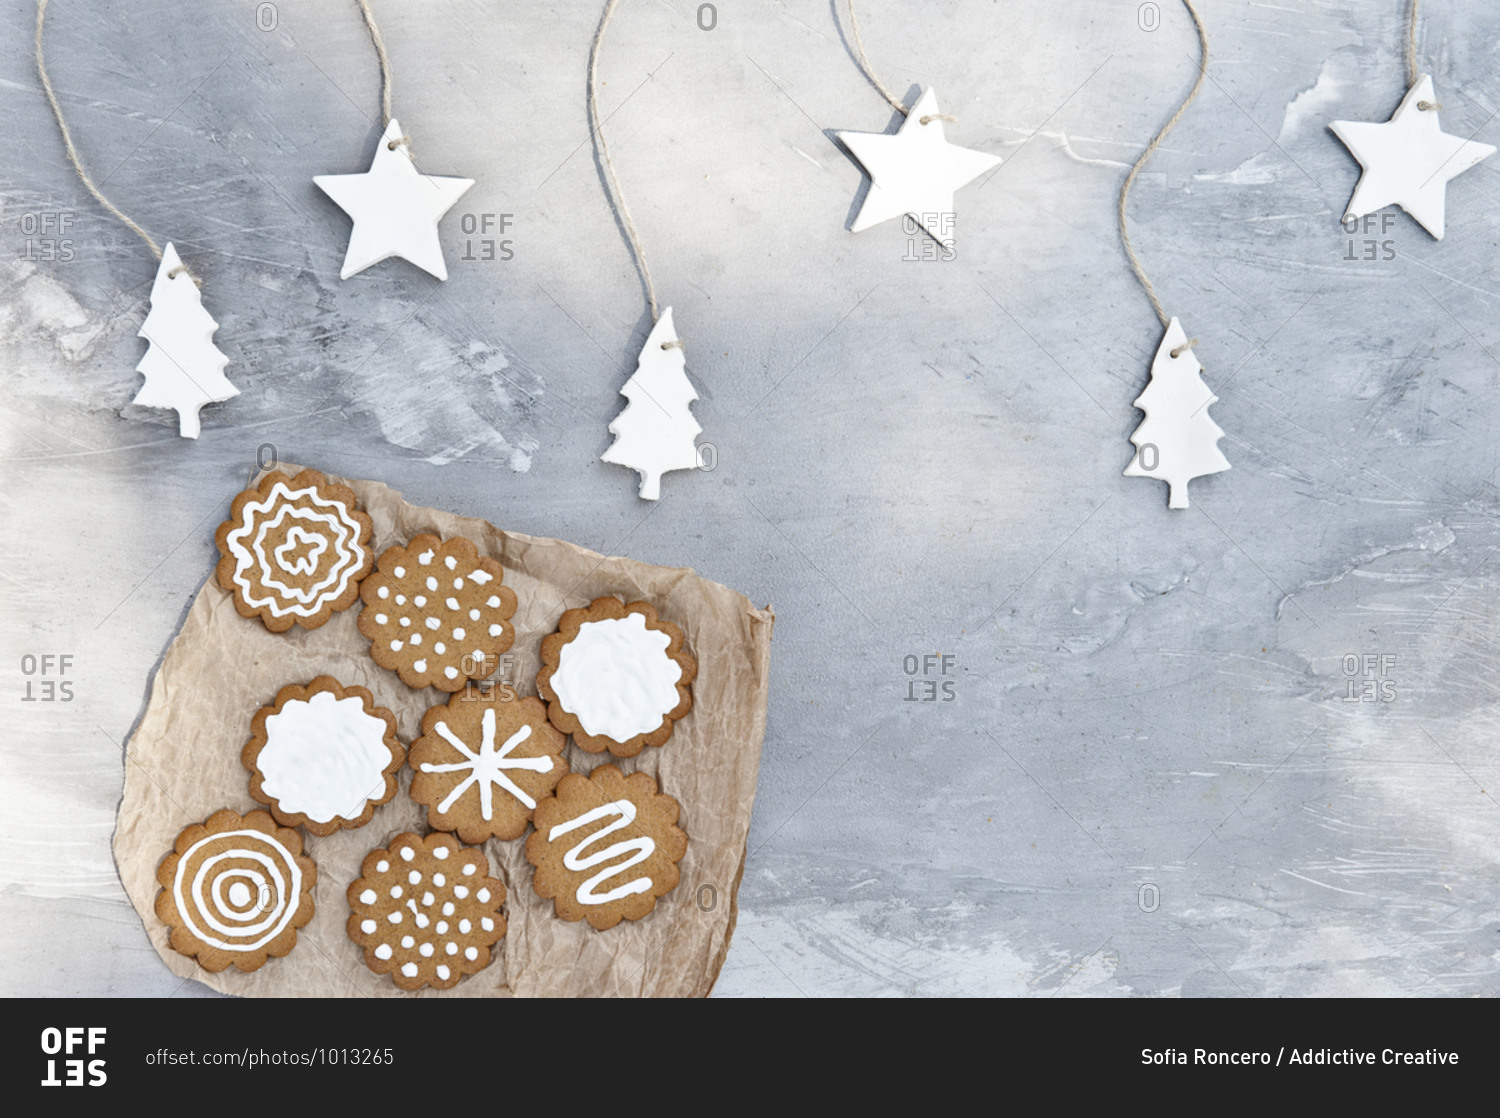 Plate with assorted gingerbread cookies with white icing placed near gray wall decorated with craft star and tree shaped paper items